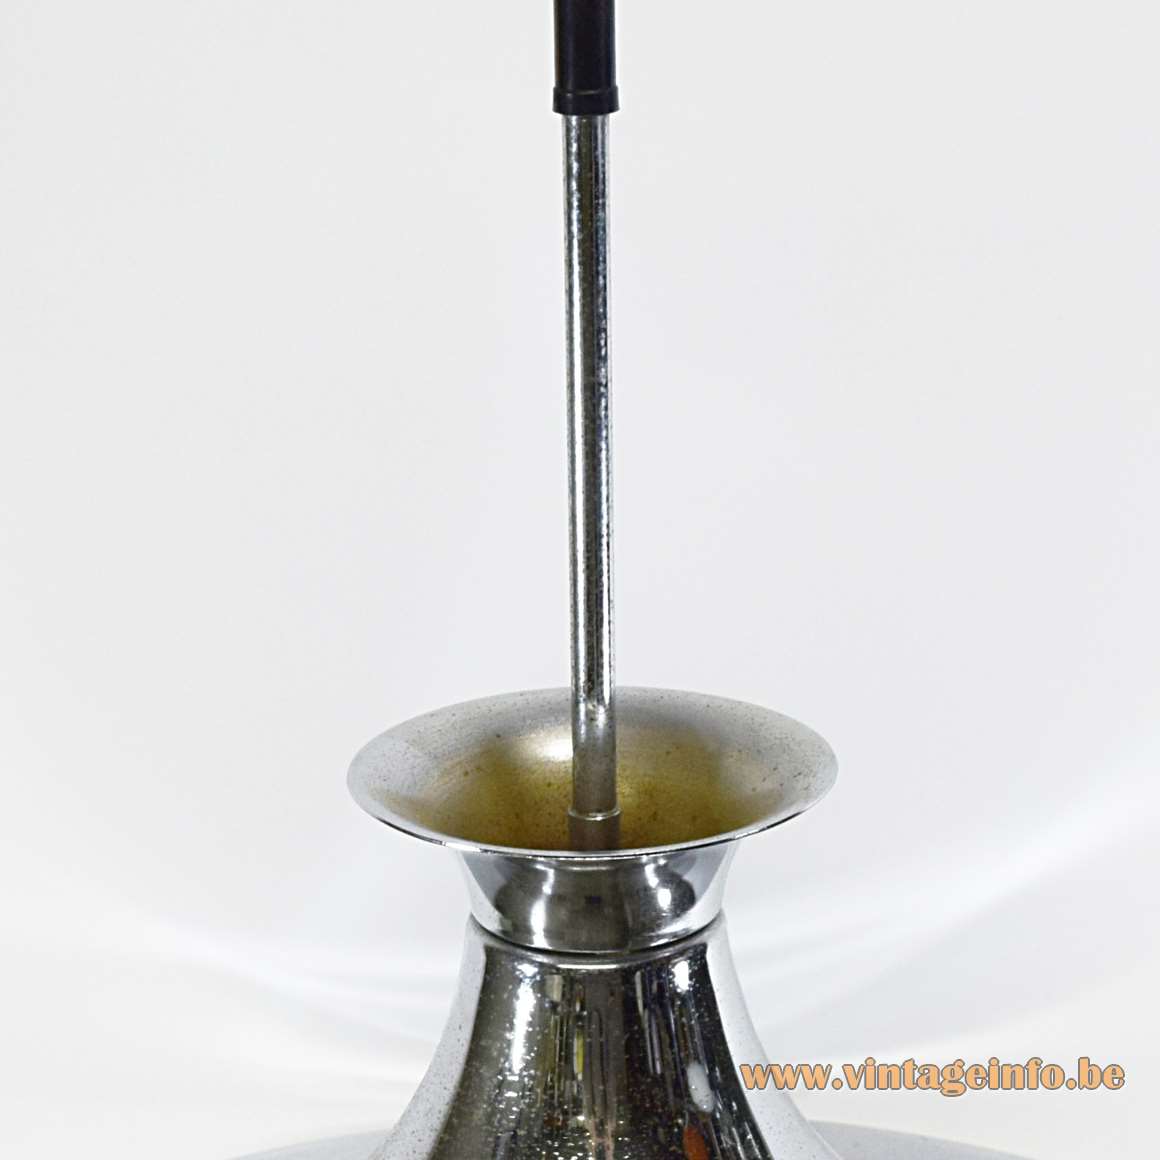 Chromed Witch Hat Pendant Lamp - Top, chrome rod